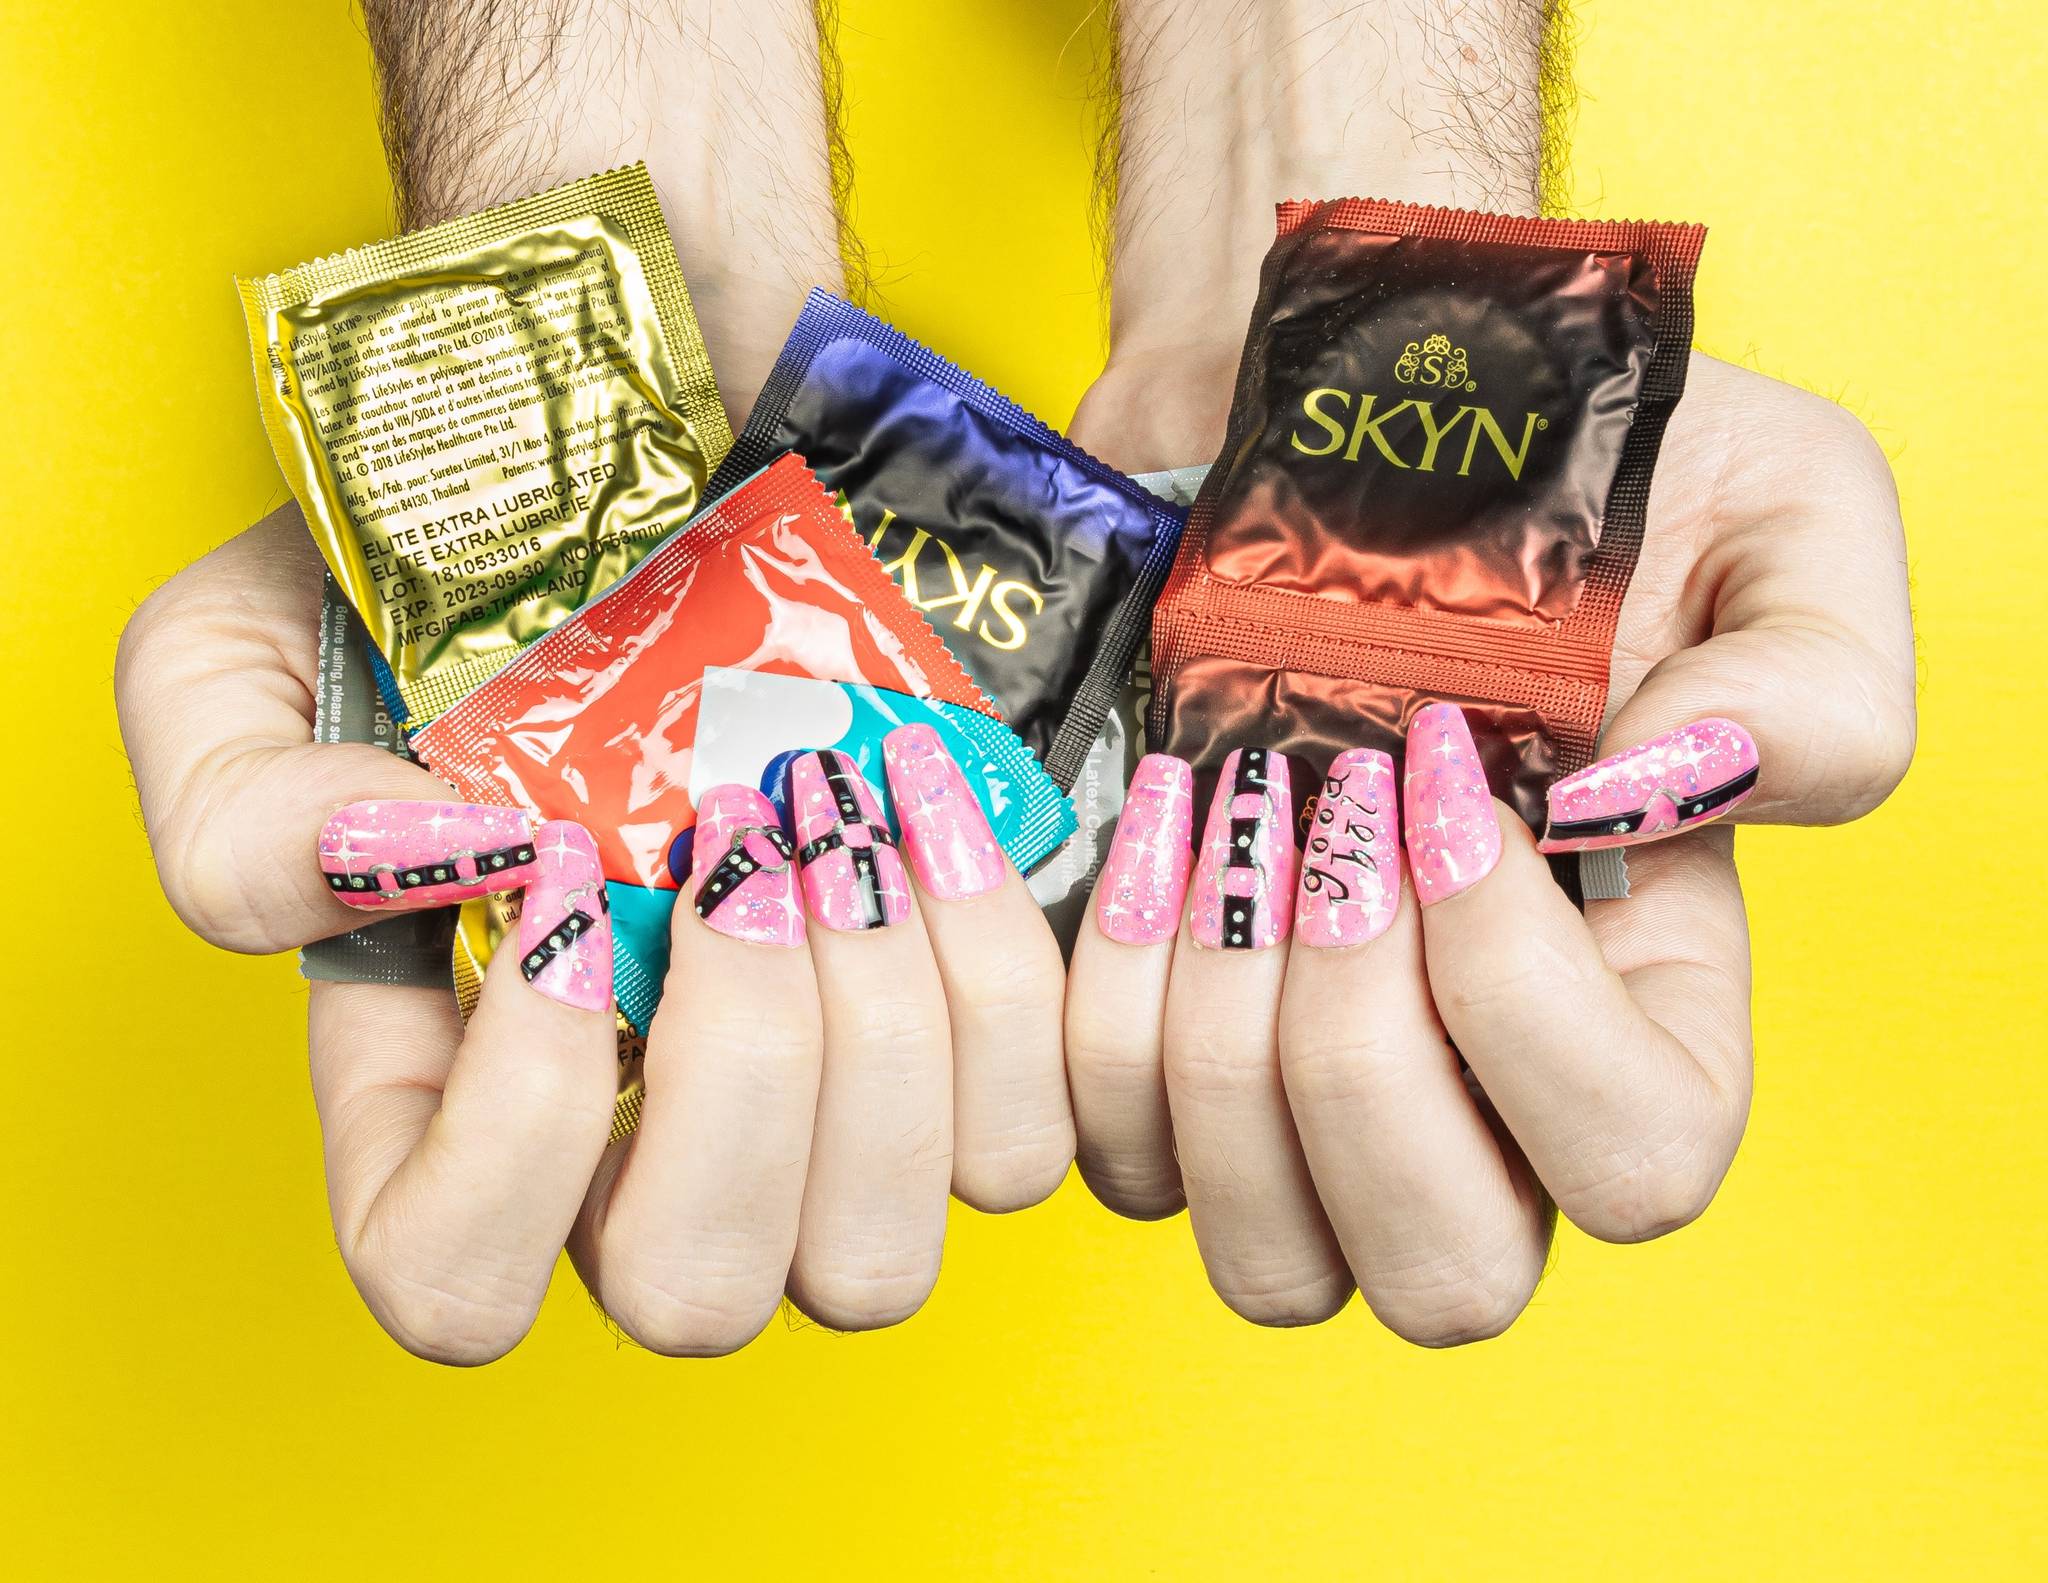 Condoms in-vogue point to shifting sexual attitudes